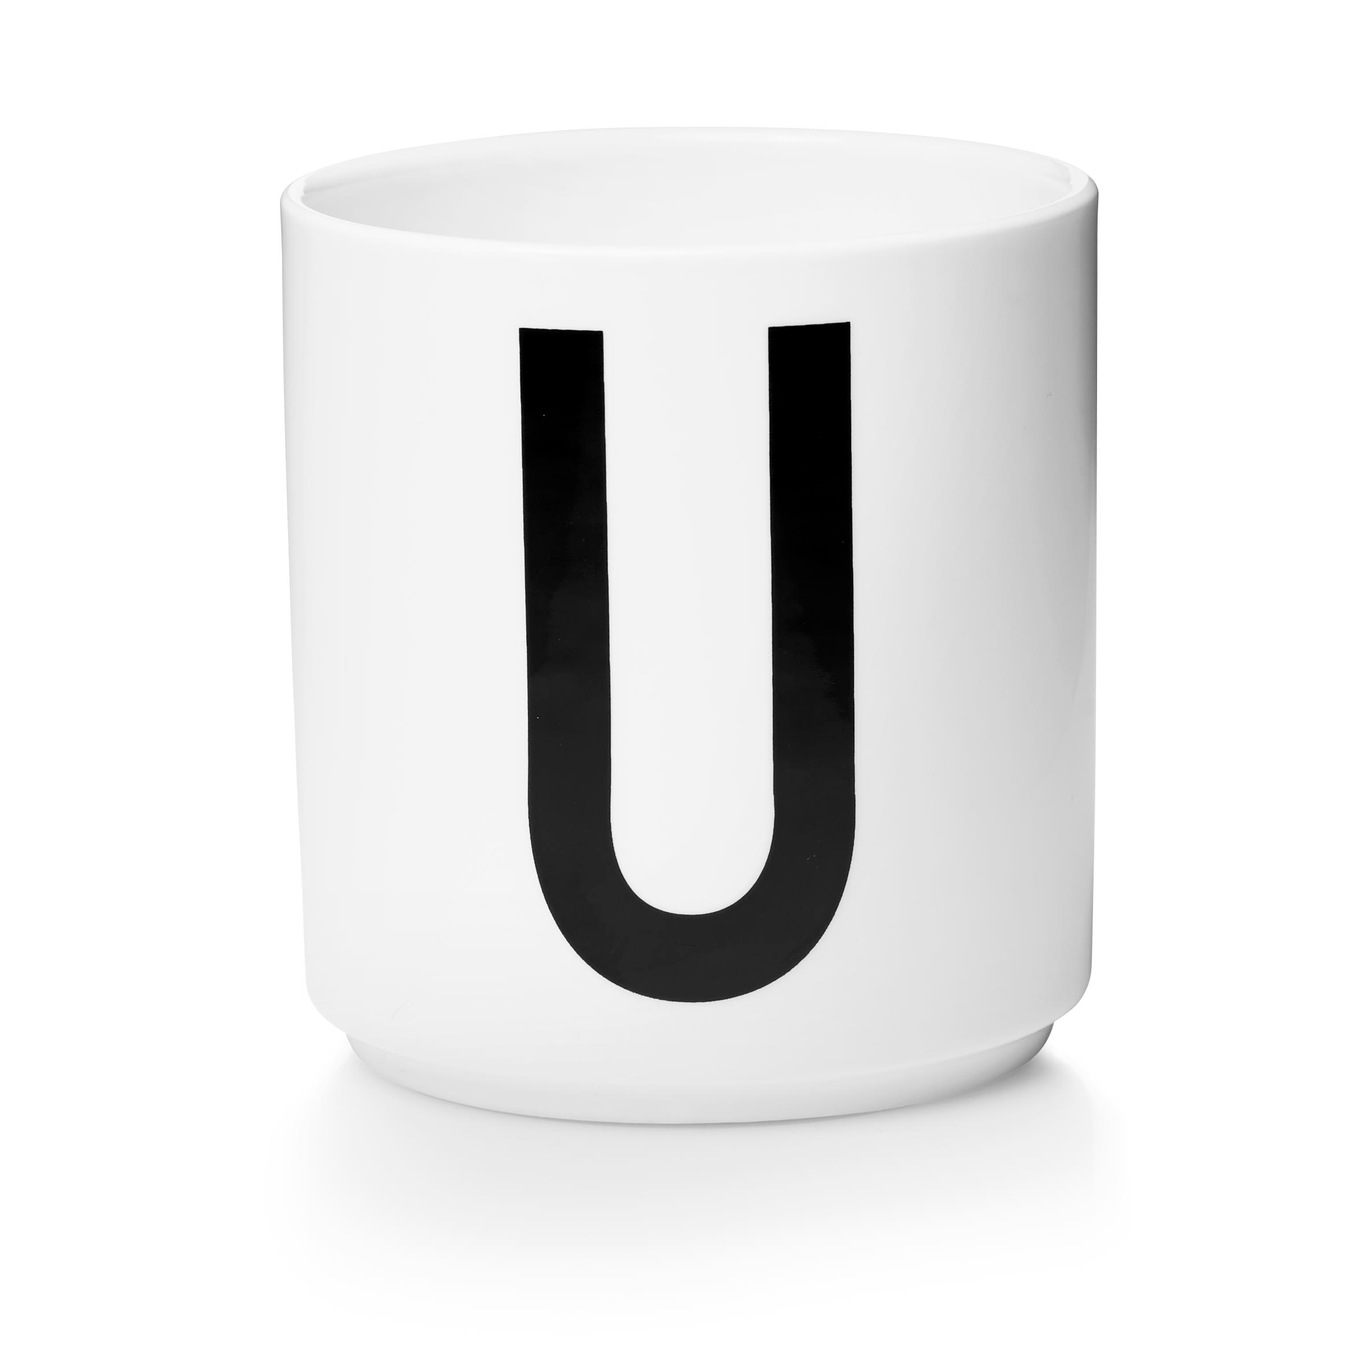 Personal Porcelain Cup White, U